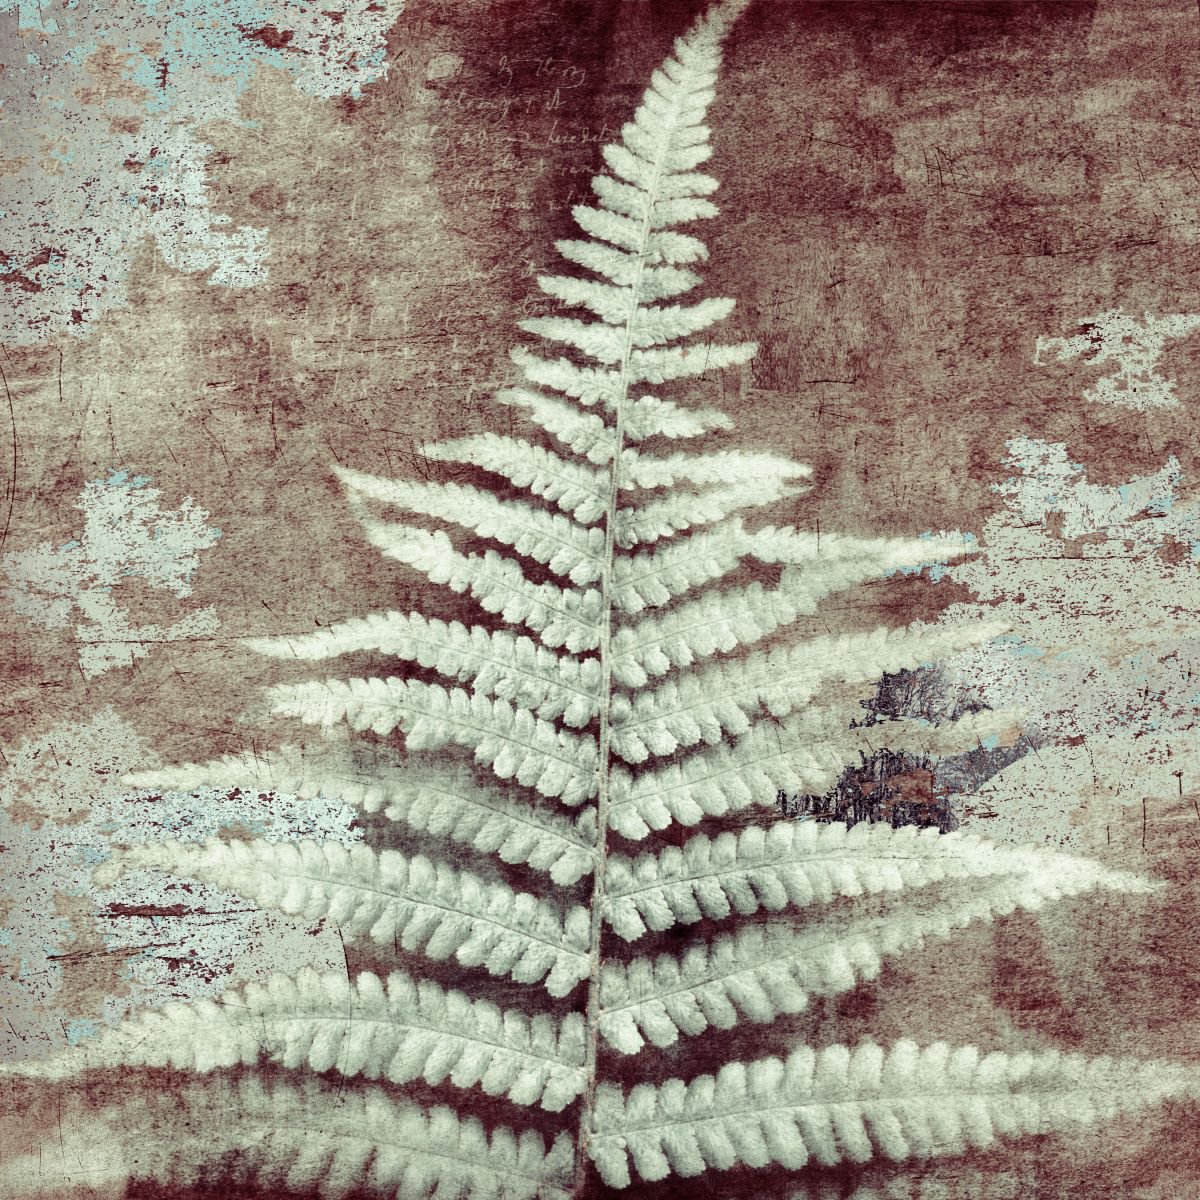 Ancient Fern closer to Cold by Nadia Attura